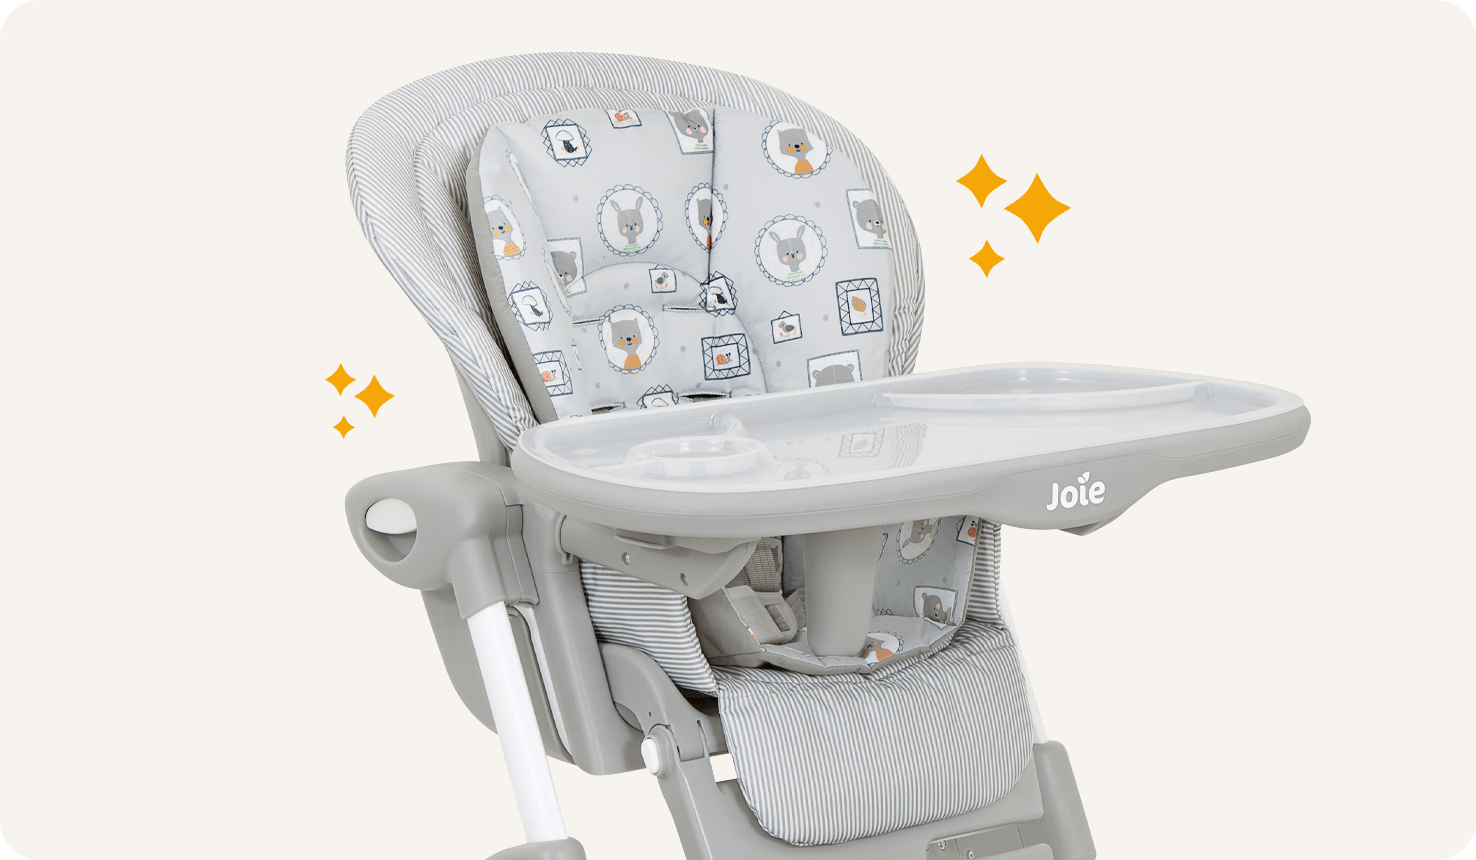 Closeup on a gray, black and white patterned Mimzy 2in1 highchair with orange star icons on either side.